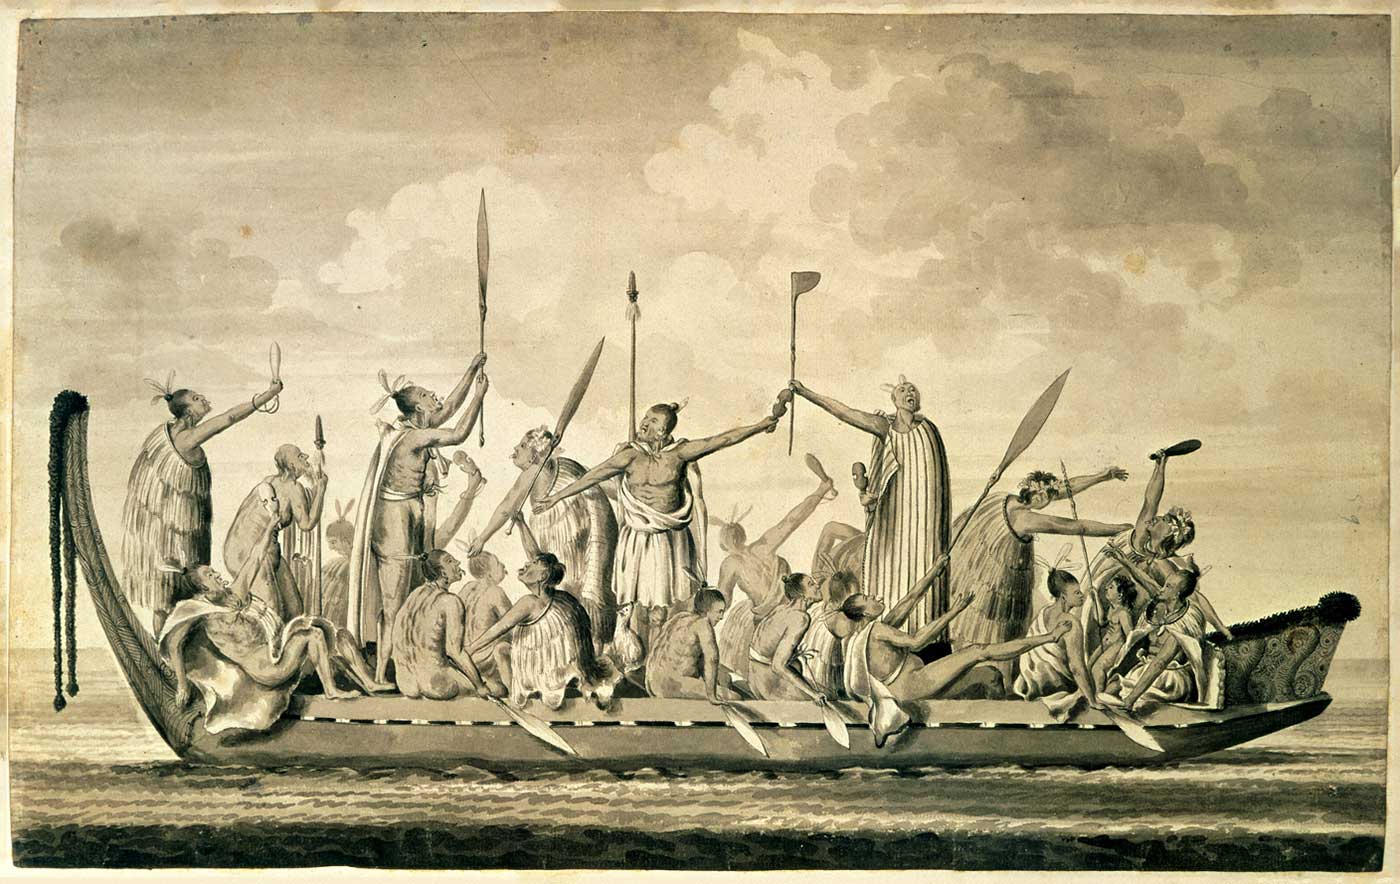 Print showing various warriors reclining and standing in a low-lying canoe with ornate carvings at either end. The men hold various weapons.  - click to view larger image